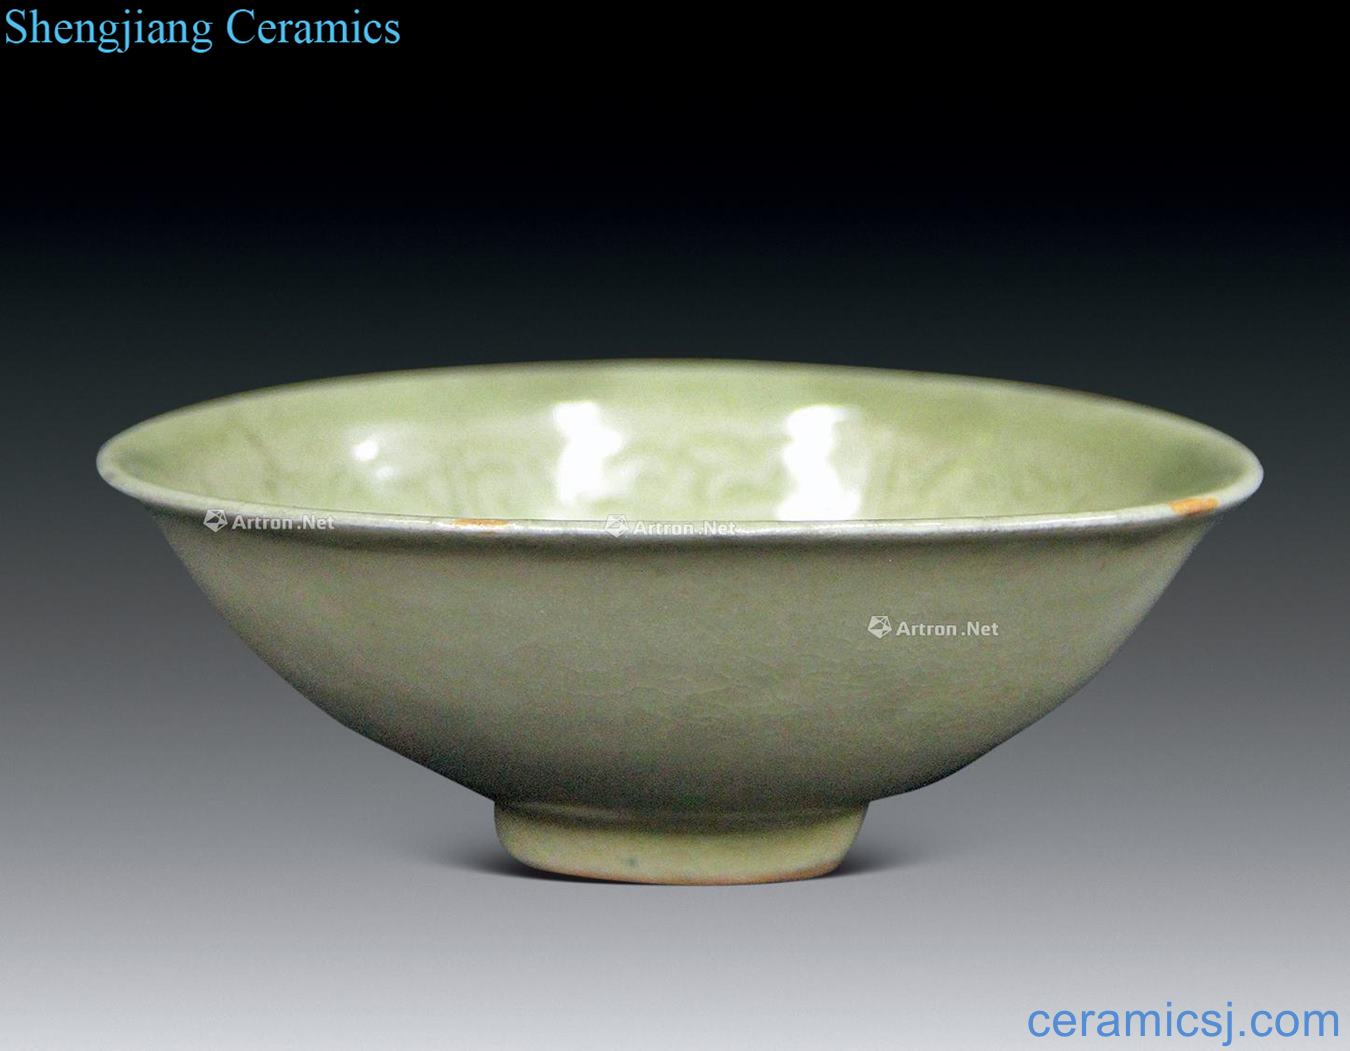 The song of the kiln carved flowers green-splashed bowls